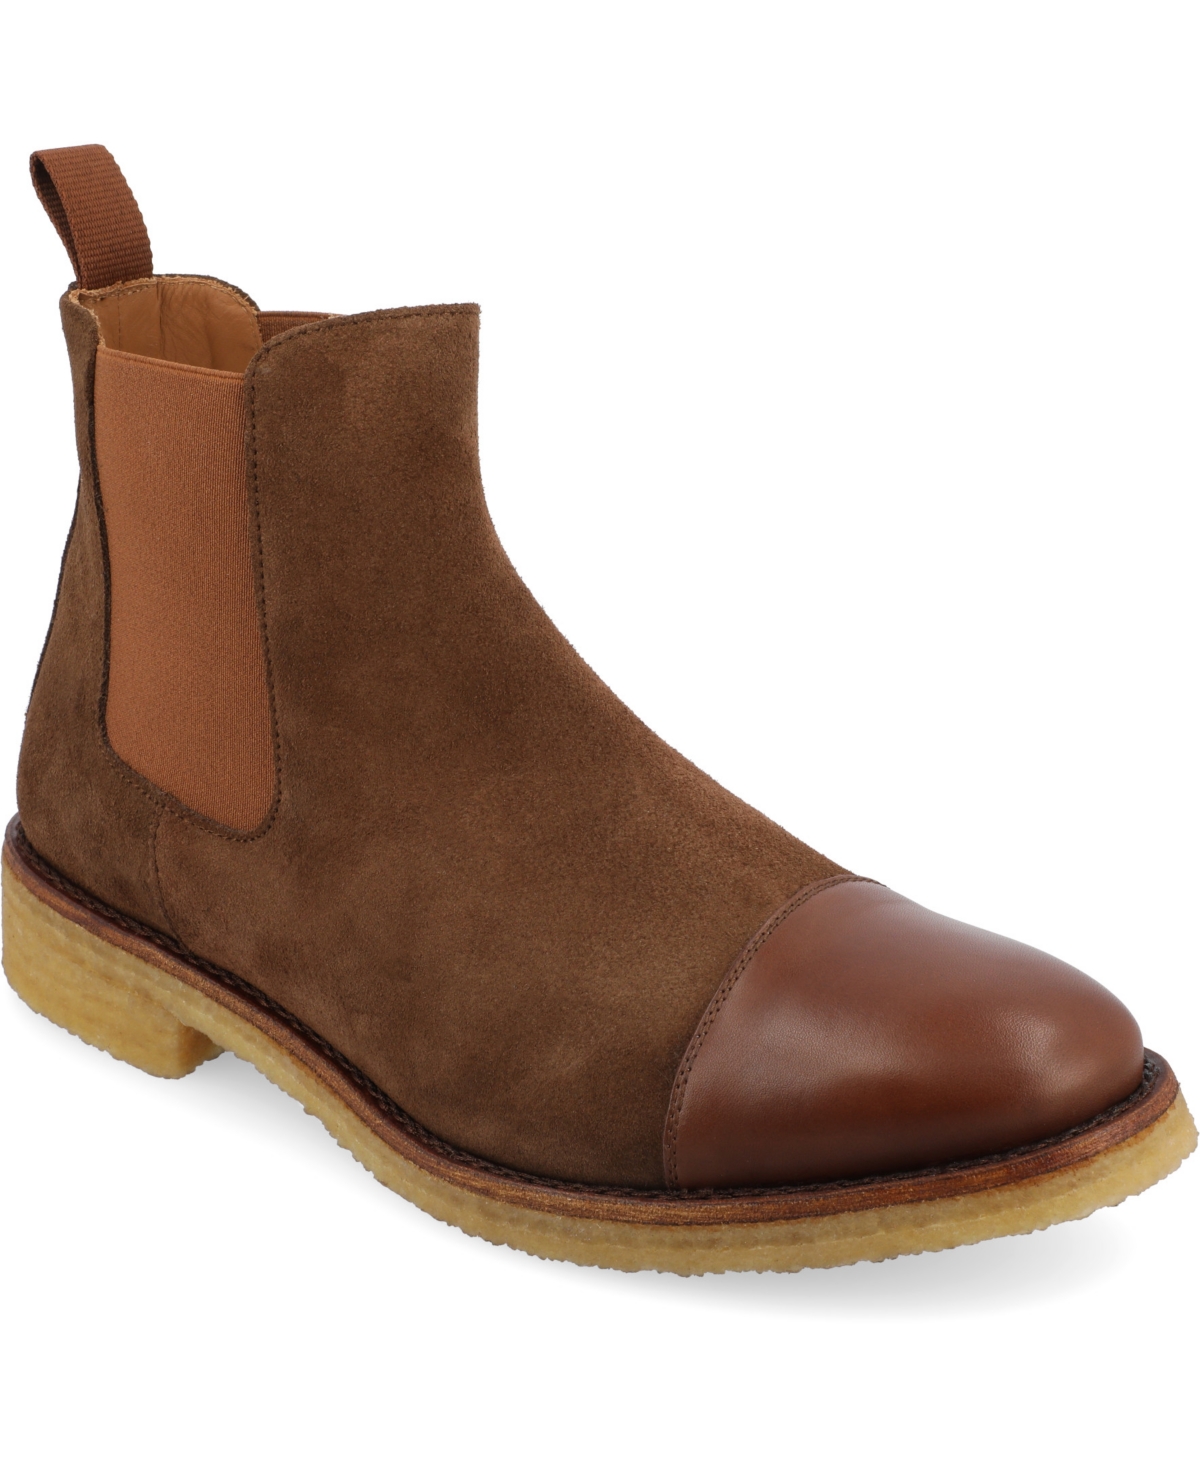 Men's The Outback Boot - Mocha